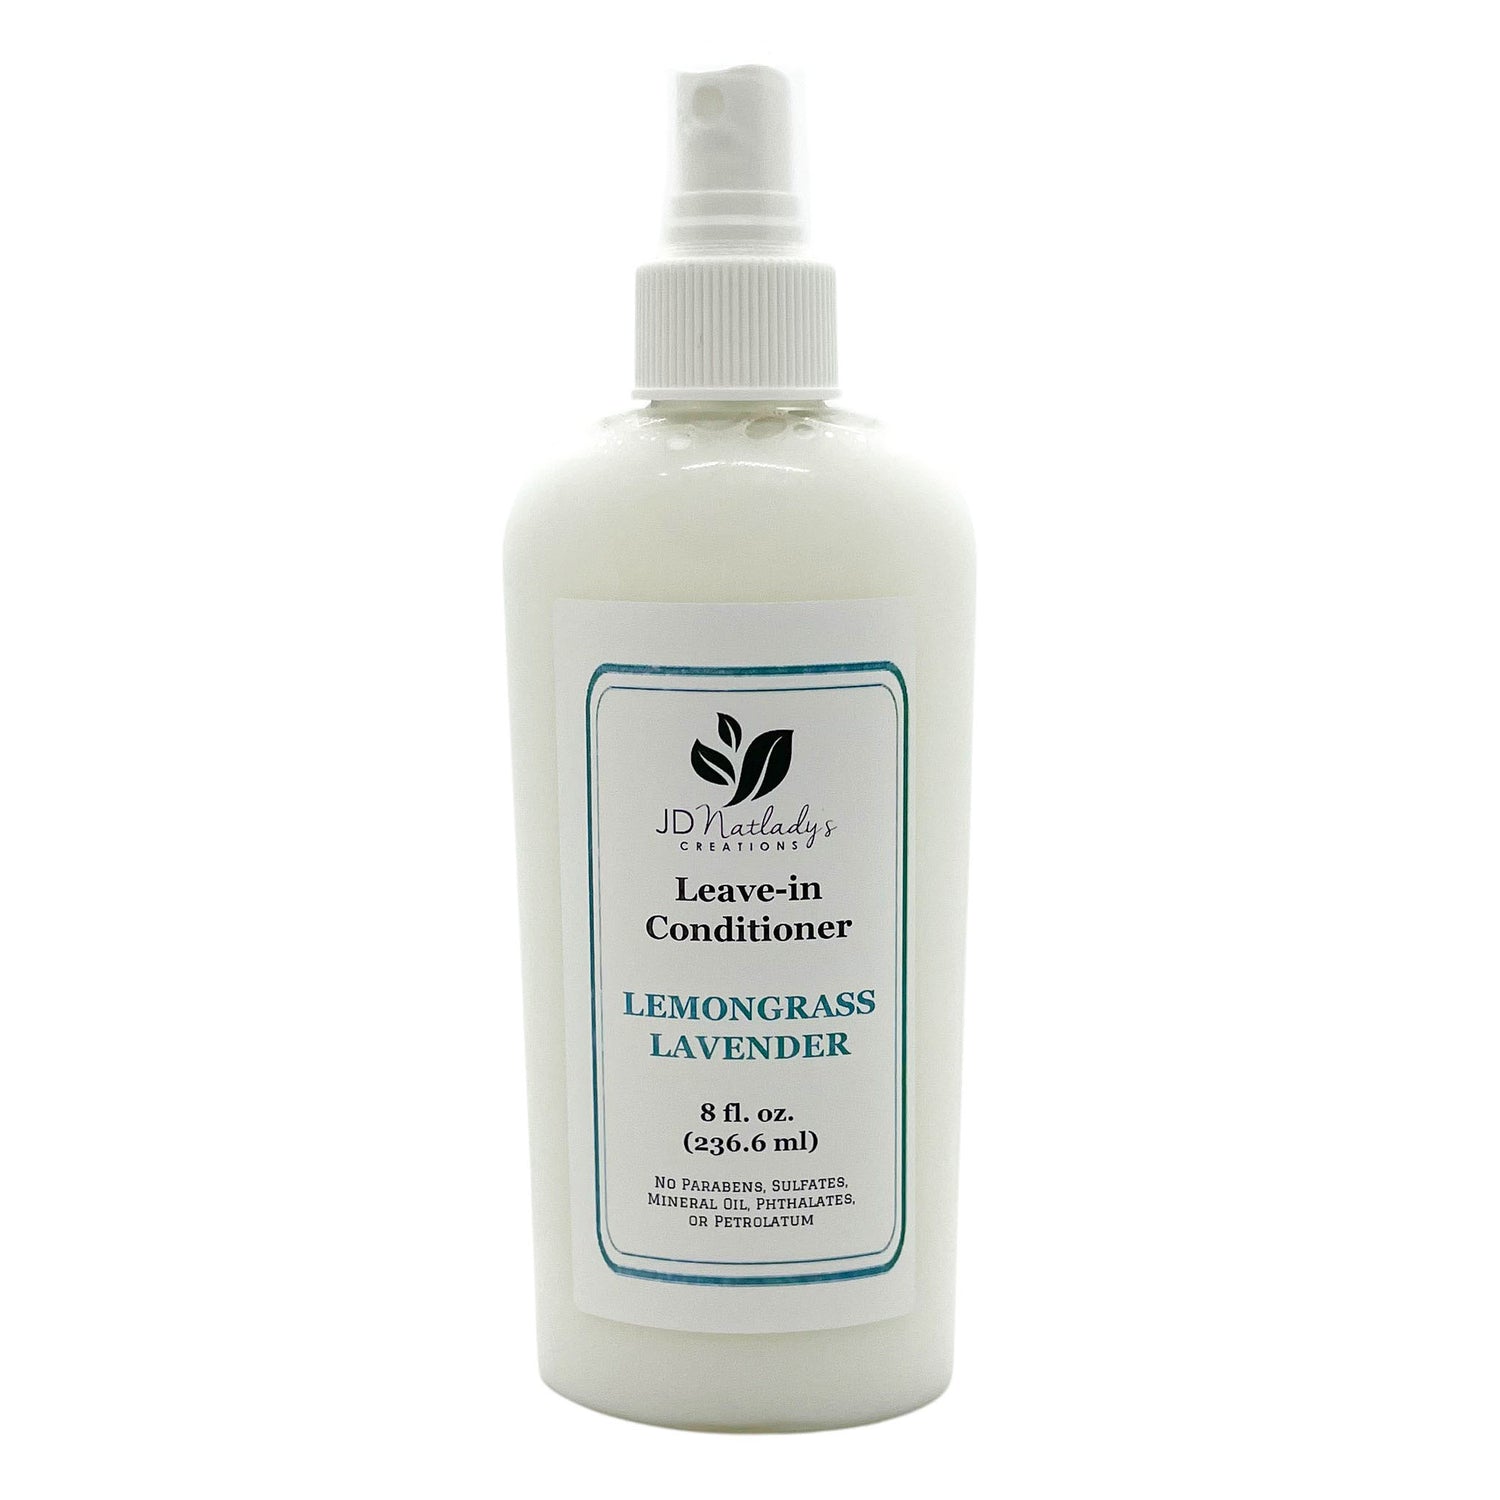 Lemongrass Lavender Leave in conditioner by JDNatlady's Creations